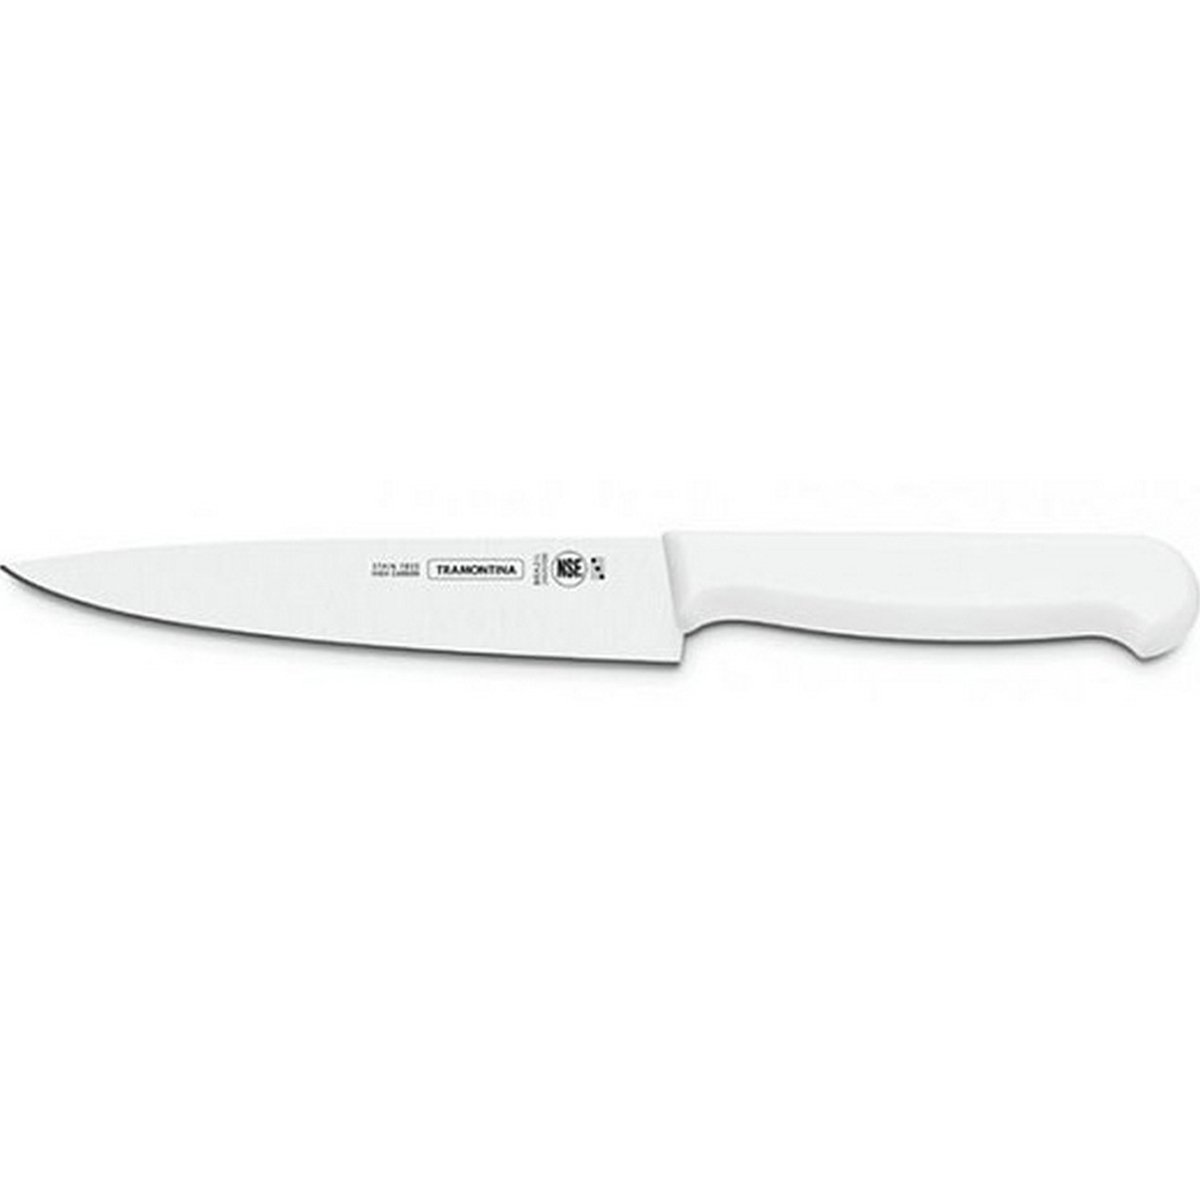 Tramontina Meat Knife 24620/180 10inch